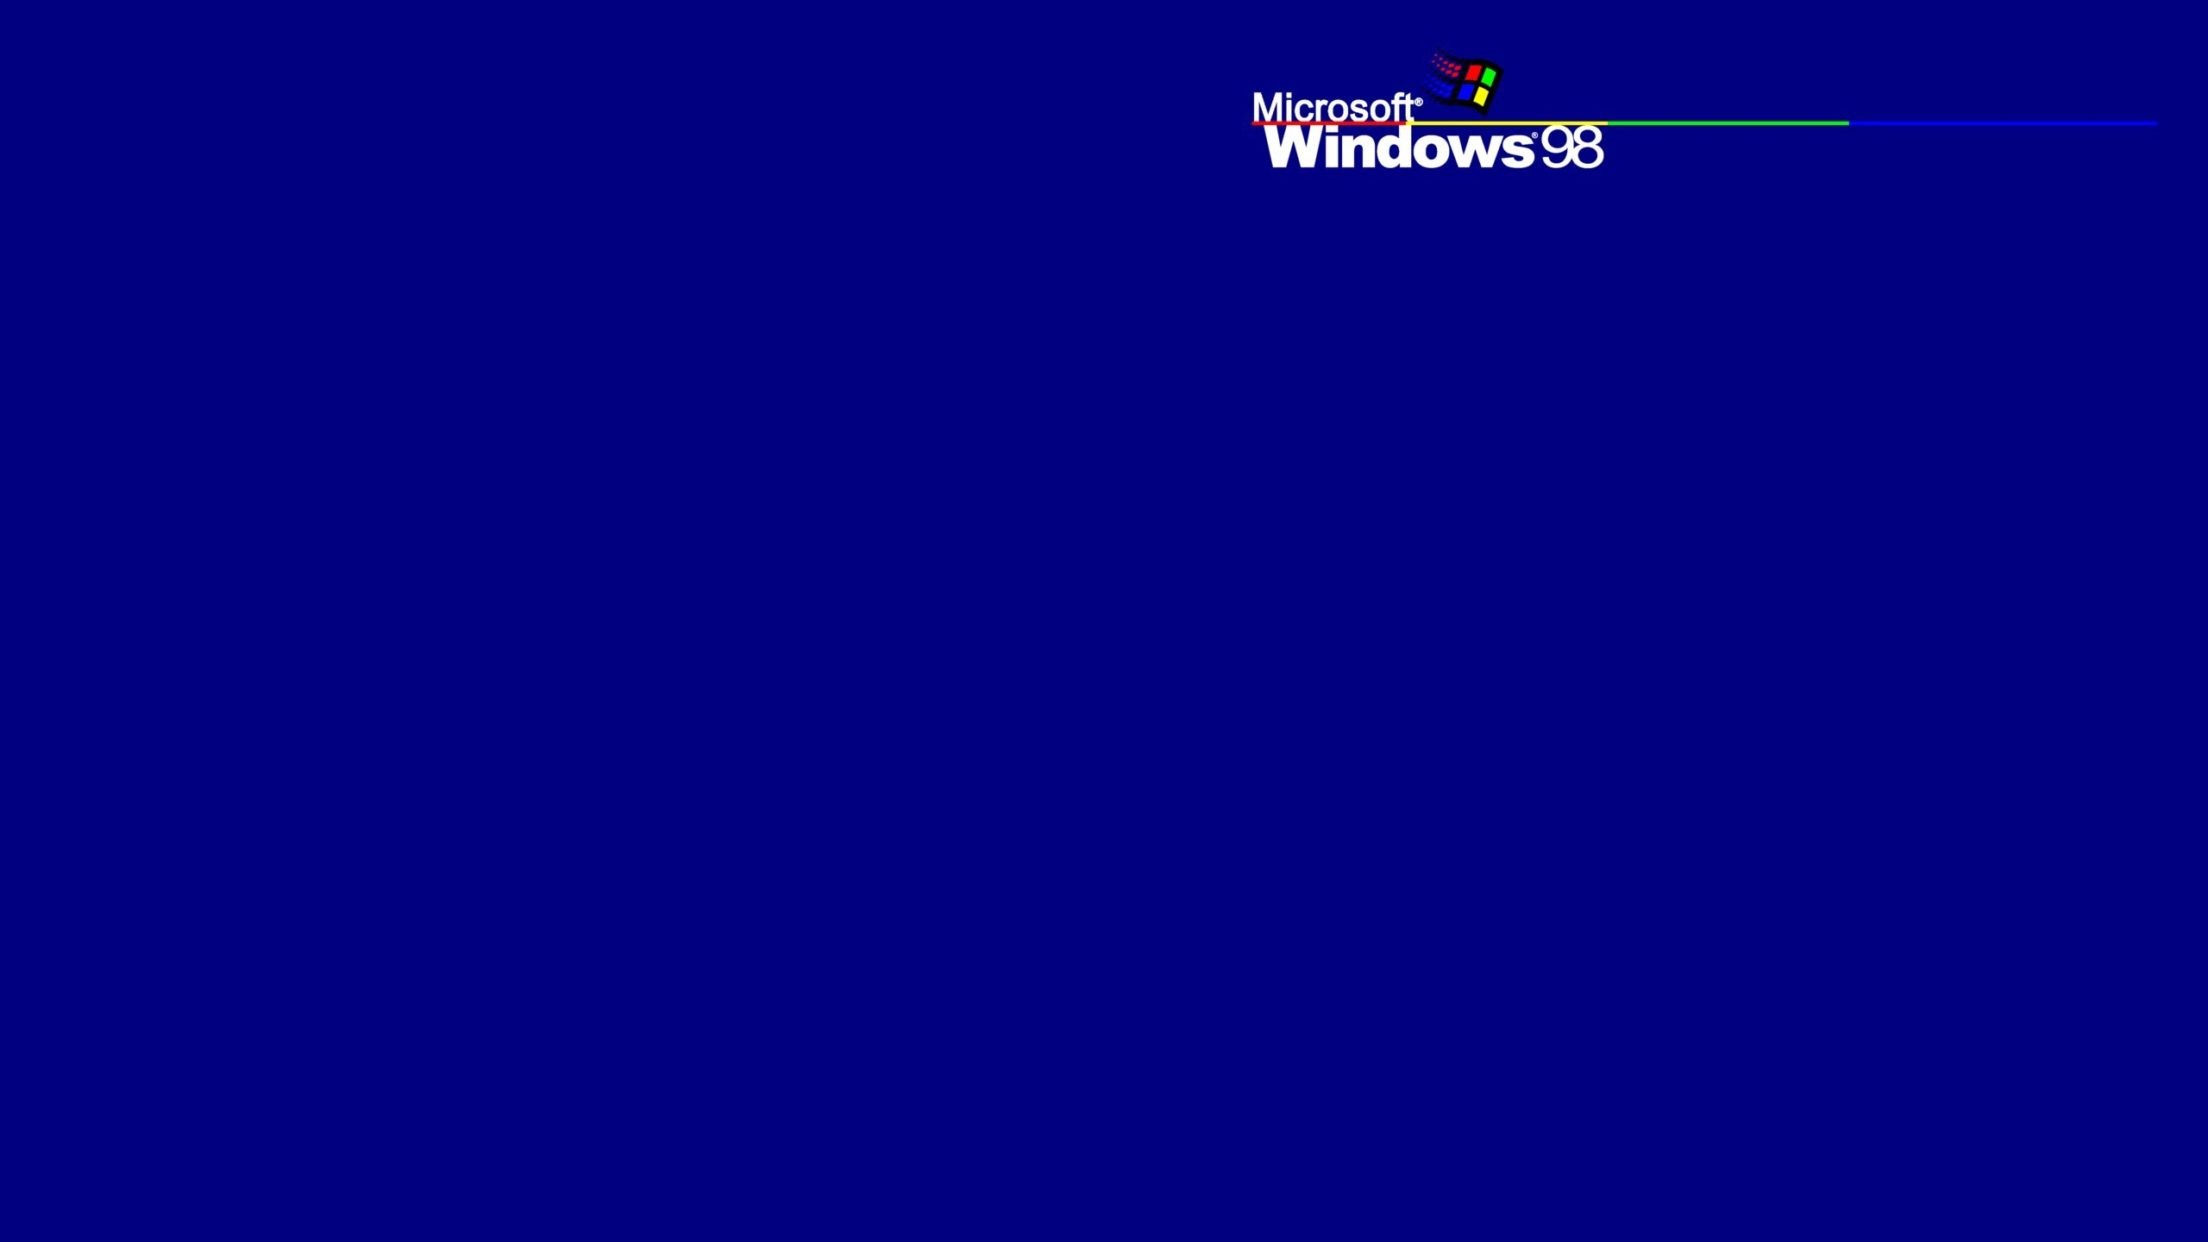 Download Win98 Free